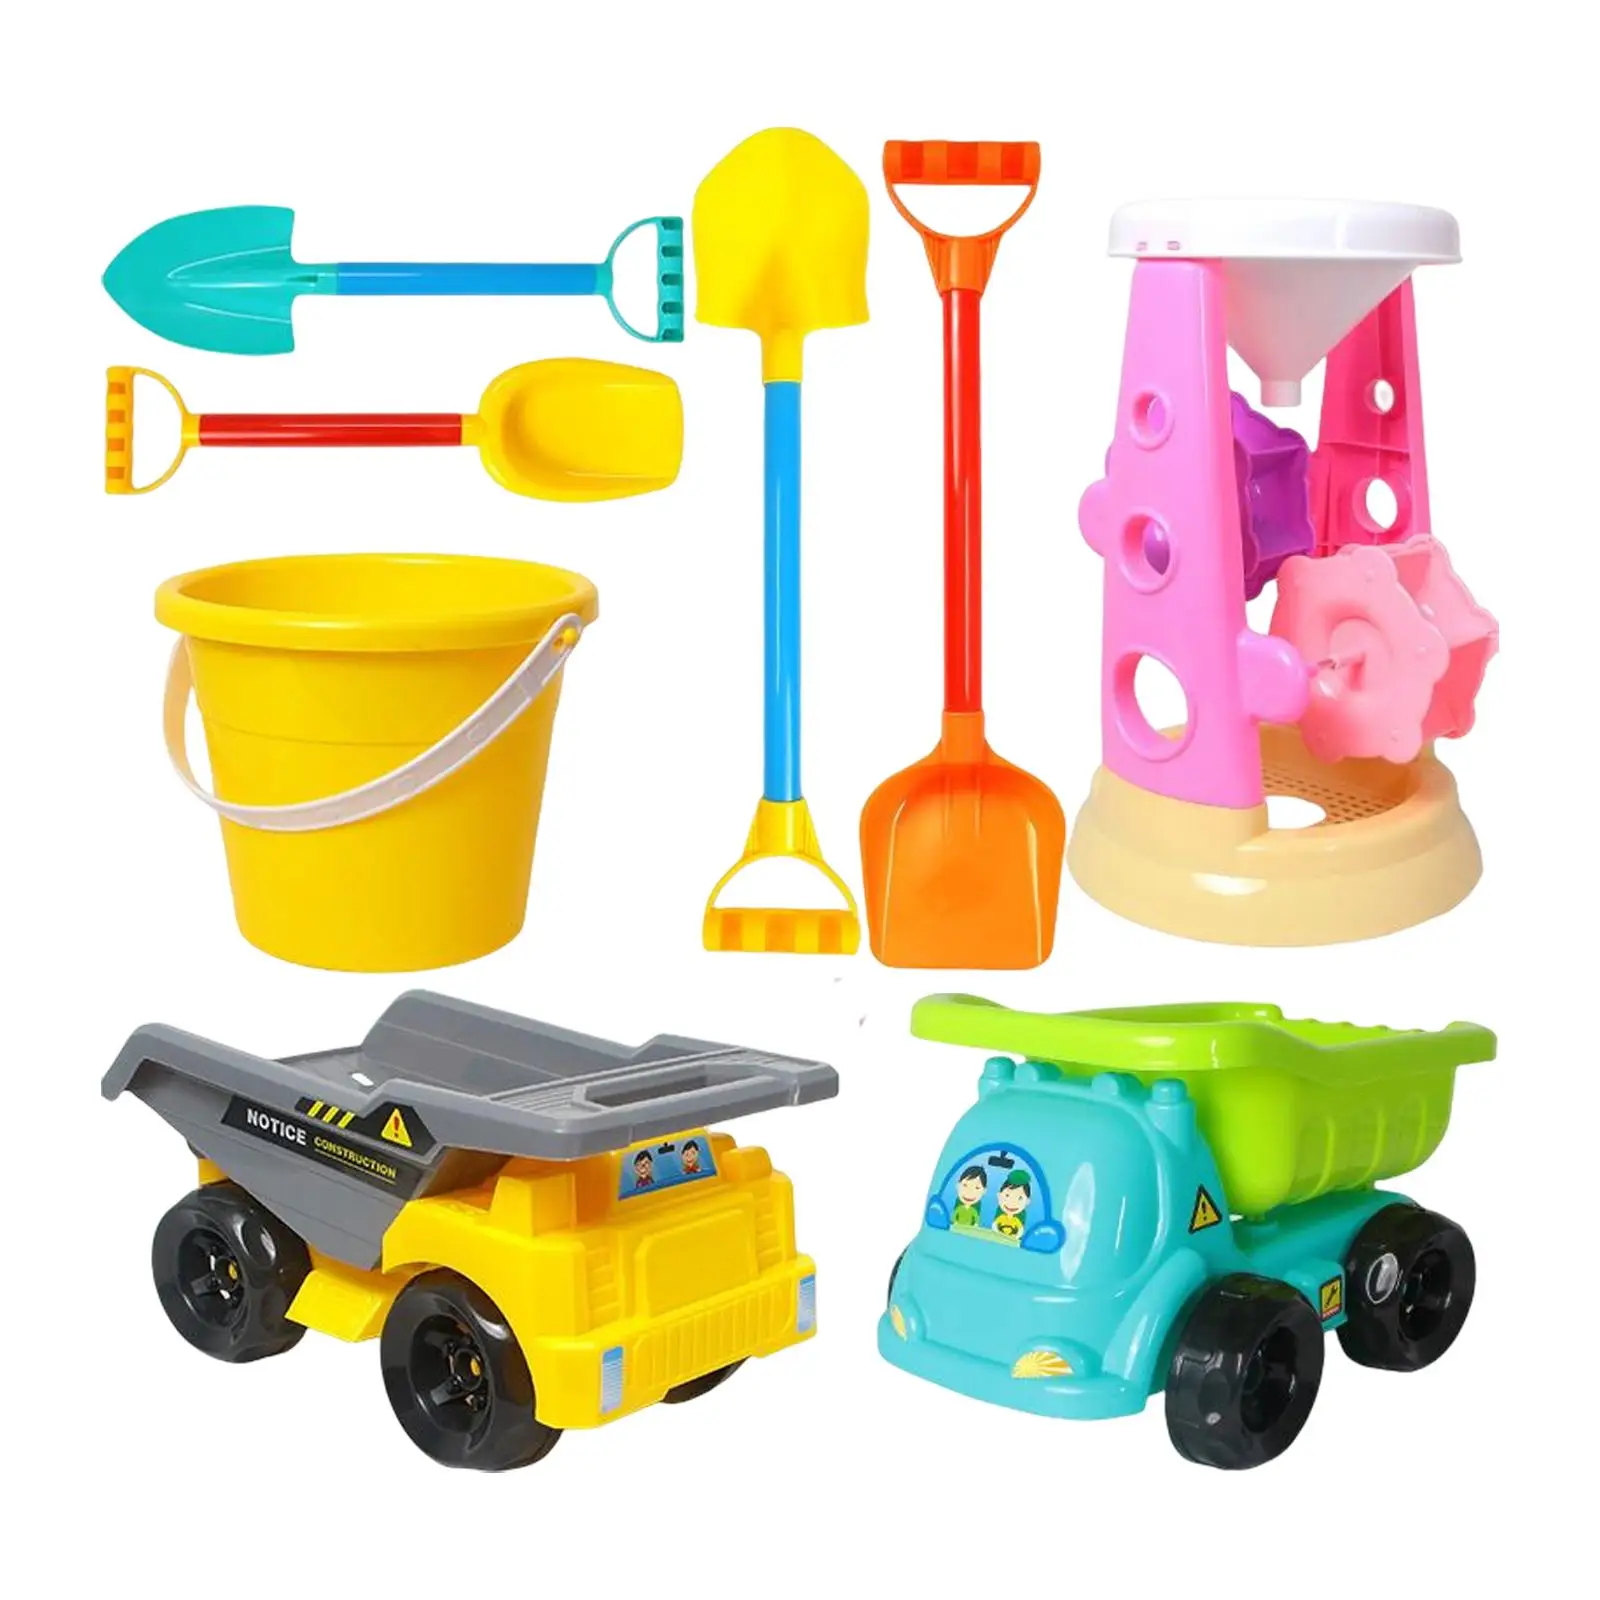 8Pcs Sand Beach Toys Outdoor Game Interactive Kids Playset Play Fun Bath Toys for Games Activity Beach Party Favors